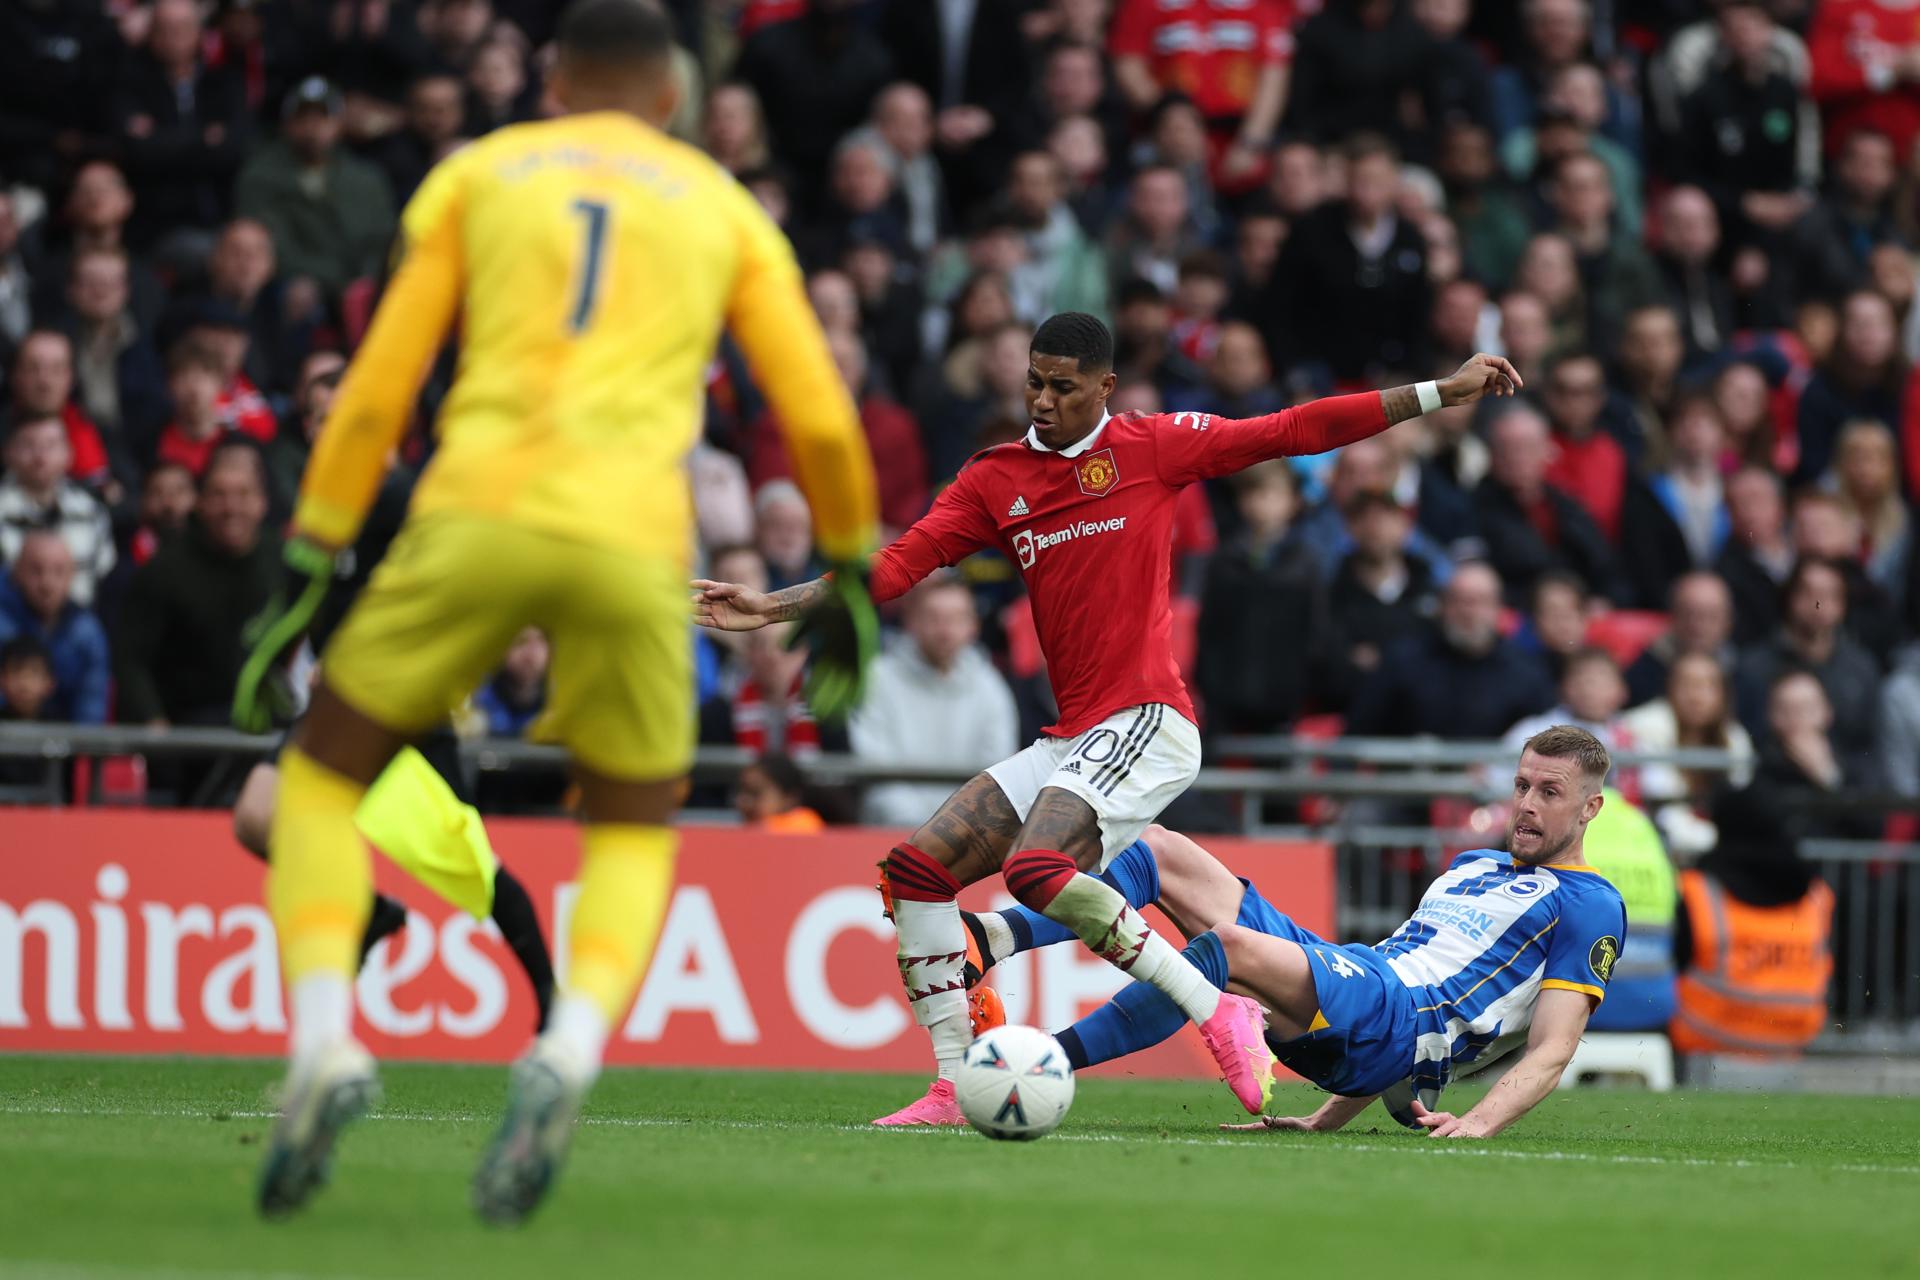 Action during the FA Cup semifinal match won by Manchester United over Brighton & Hove Albion in a penalty shootout after 120 minutes of regulation plus extra time, at Wembley Stadium in London, on April 23, 2023. EFE/EPA/ISABEL INFANTES
